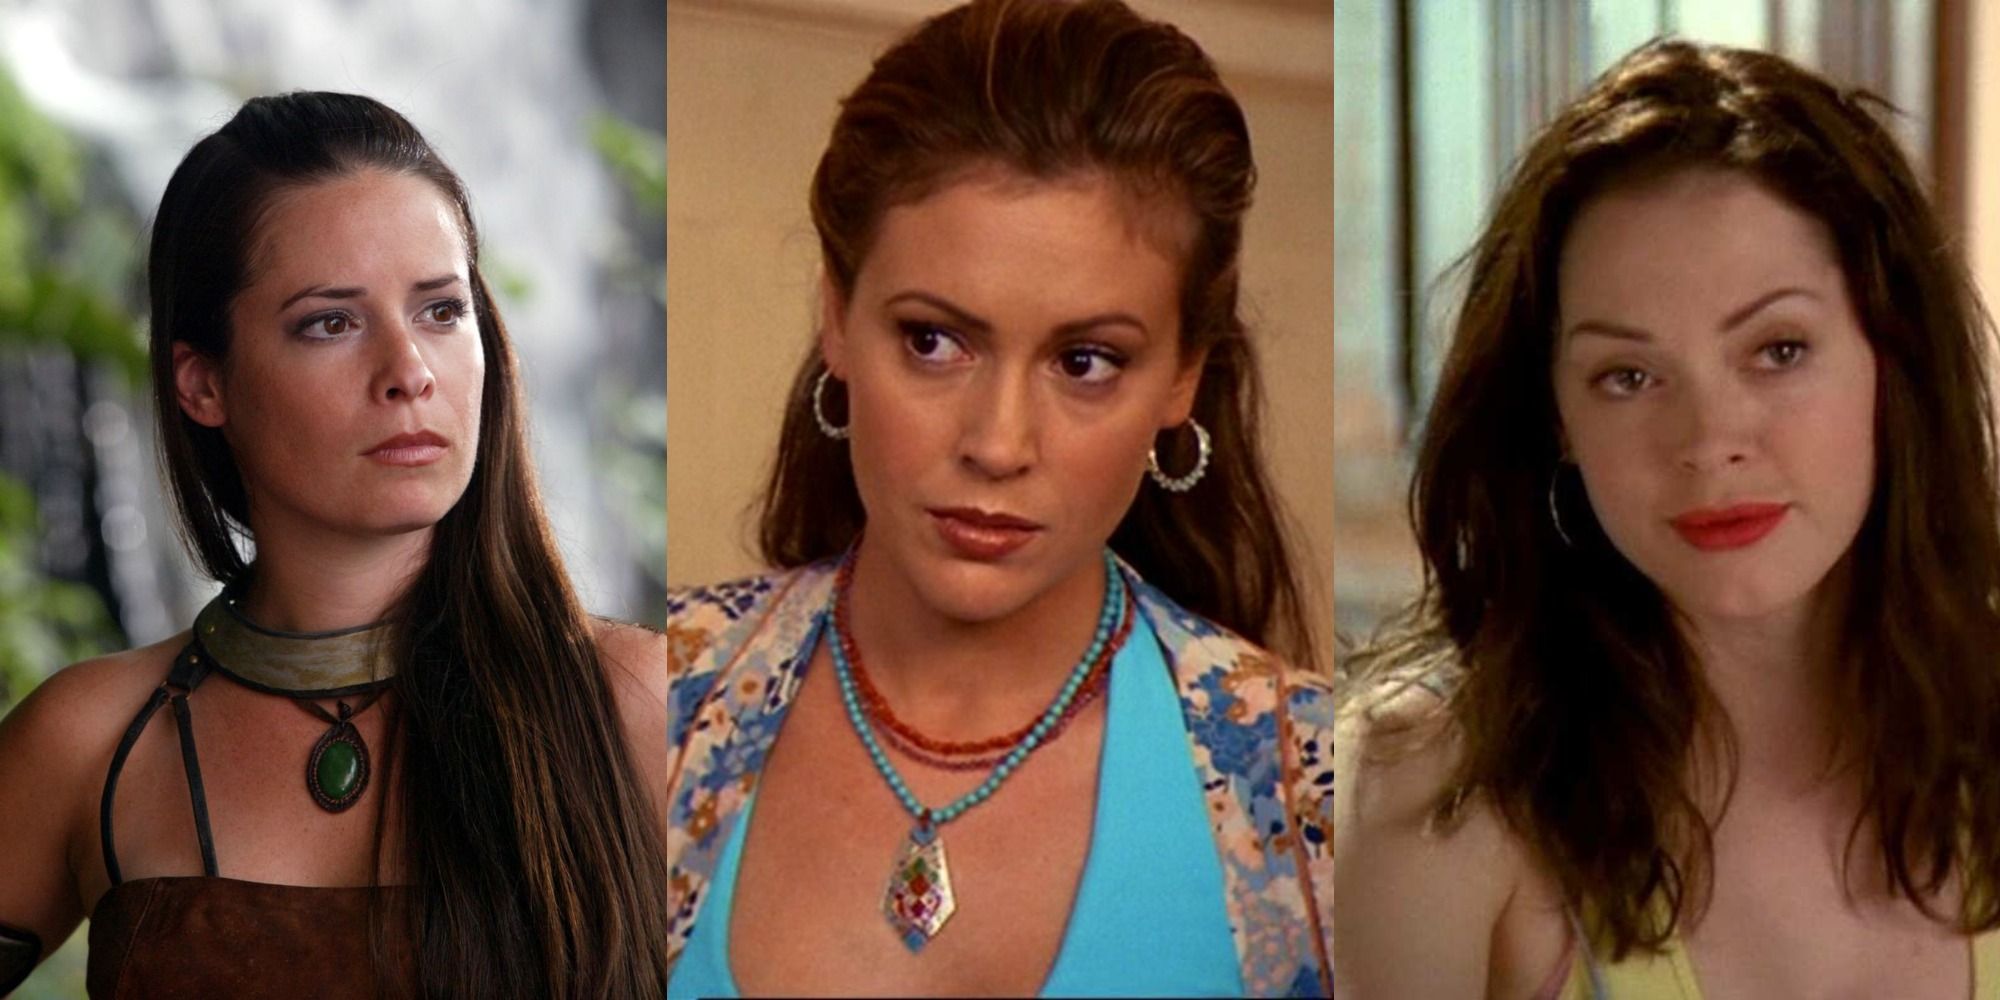 An image of Phoebe, Piper, and Paige in Charmed